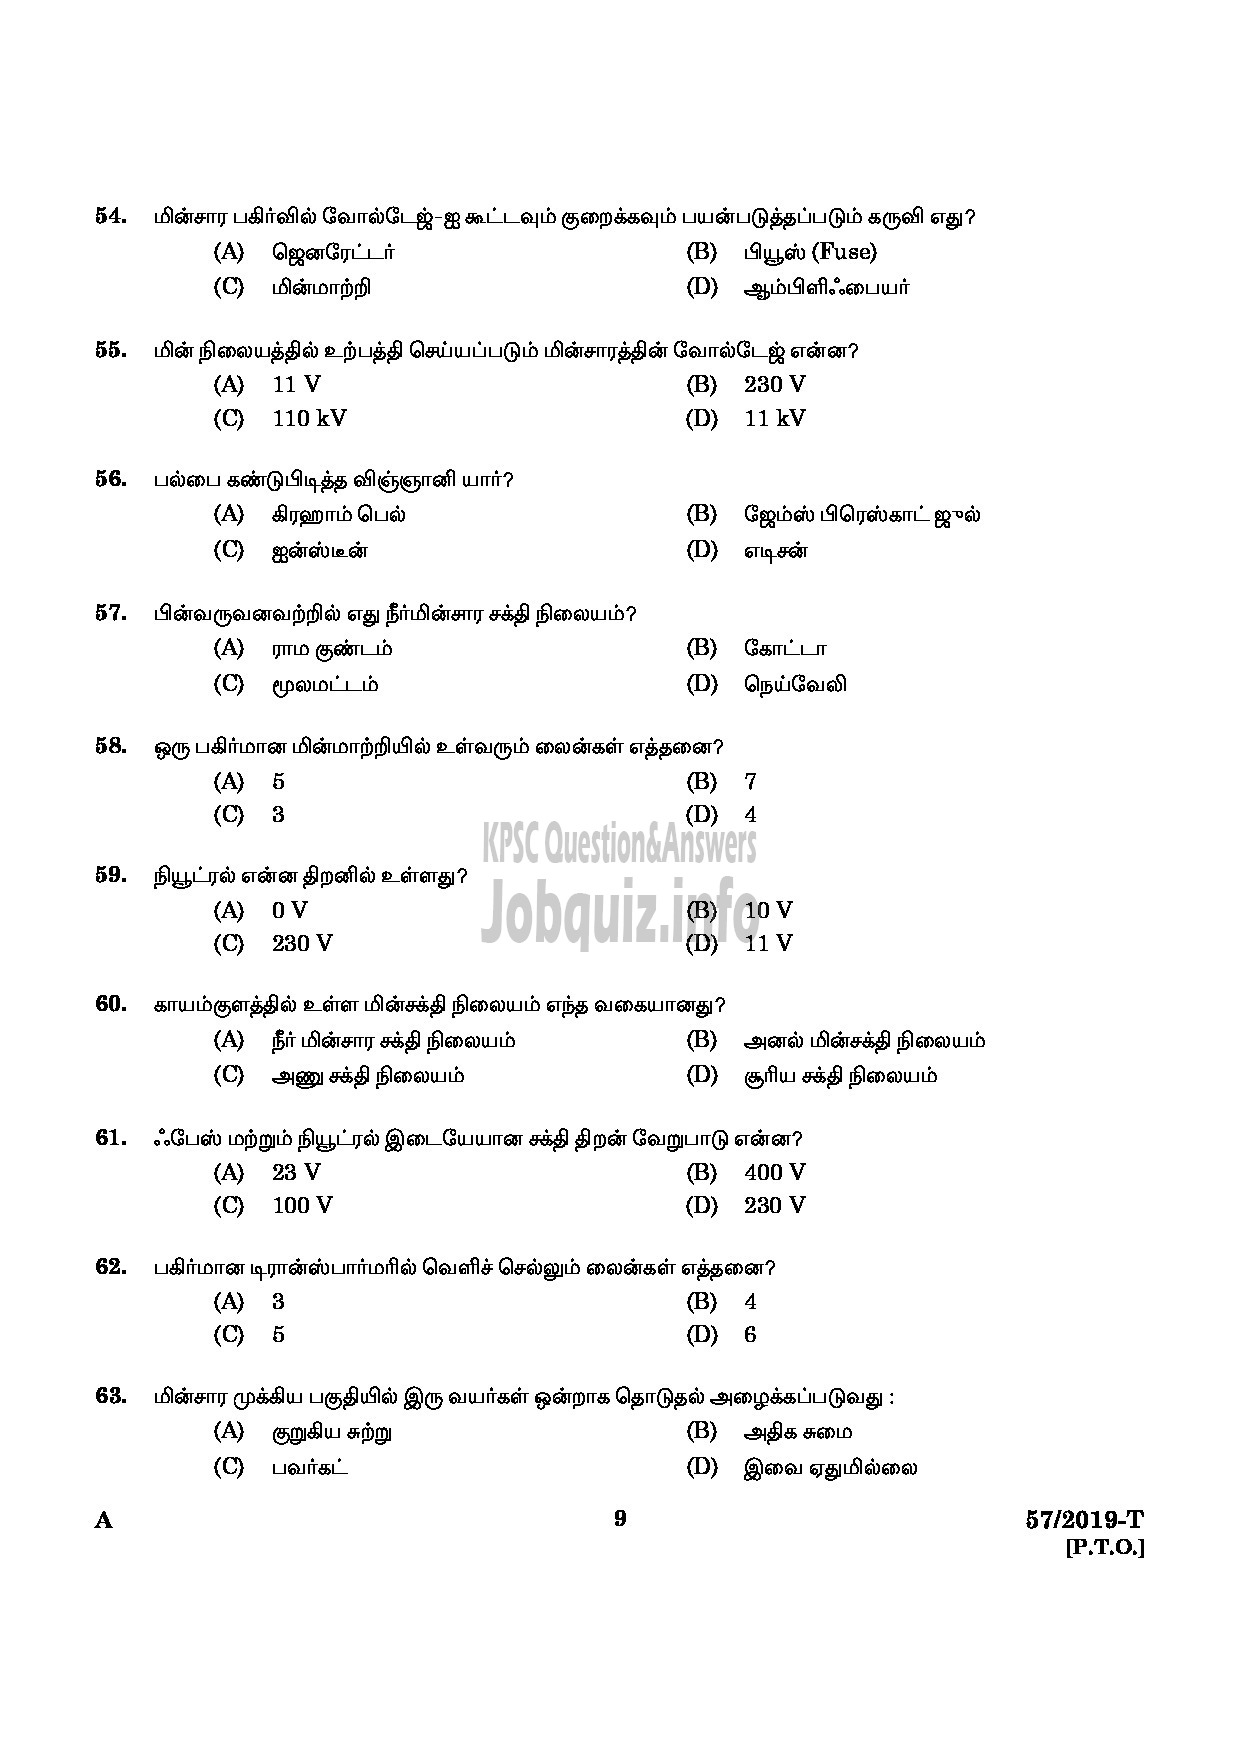 Kerala PSC Question Paper - 	POWER LAUNDRY ATTENDER MEDICAL EDUCATION TAMIL-7